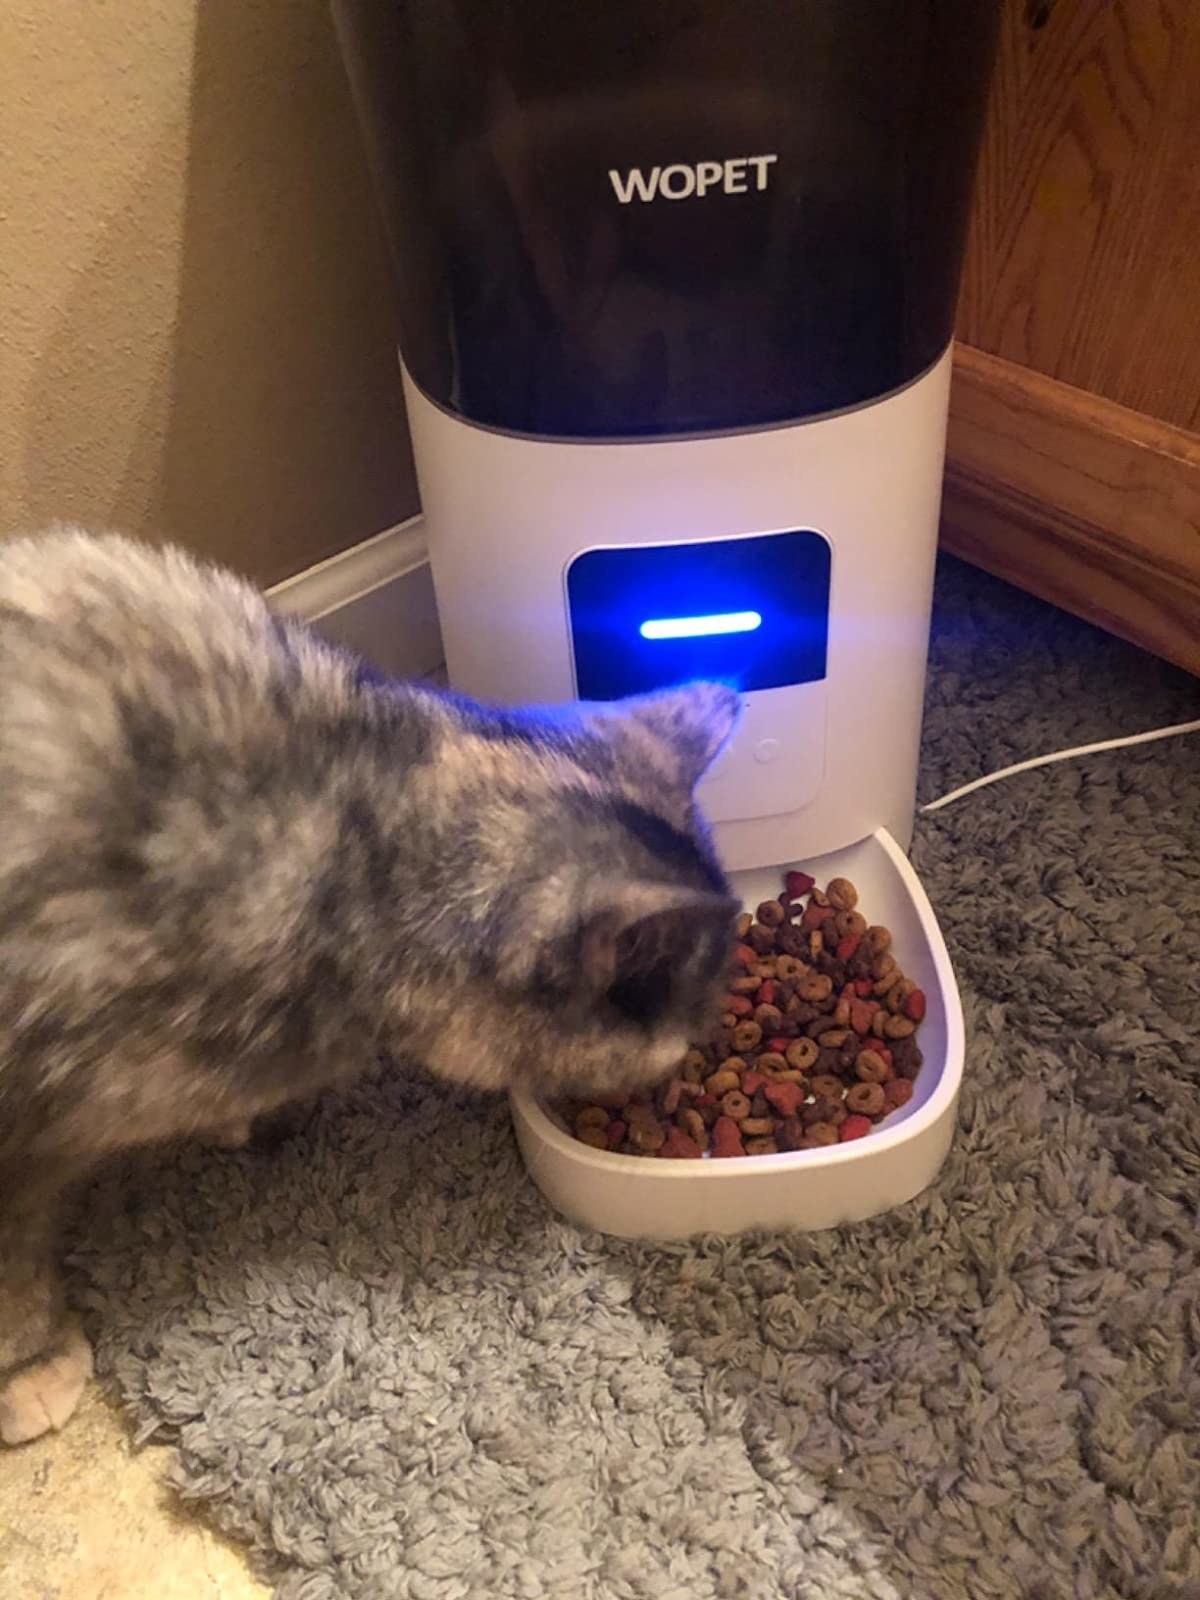 A cat eats out of the feeder